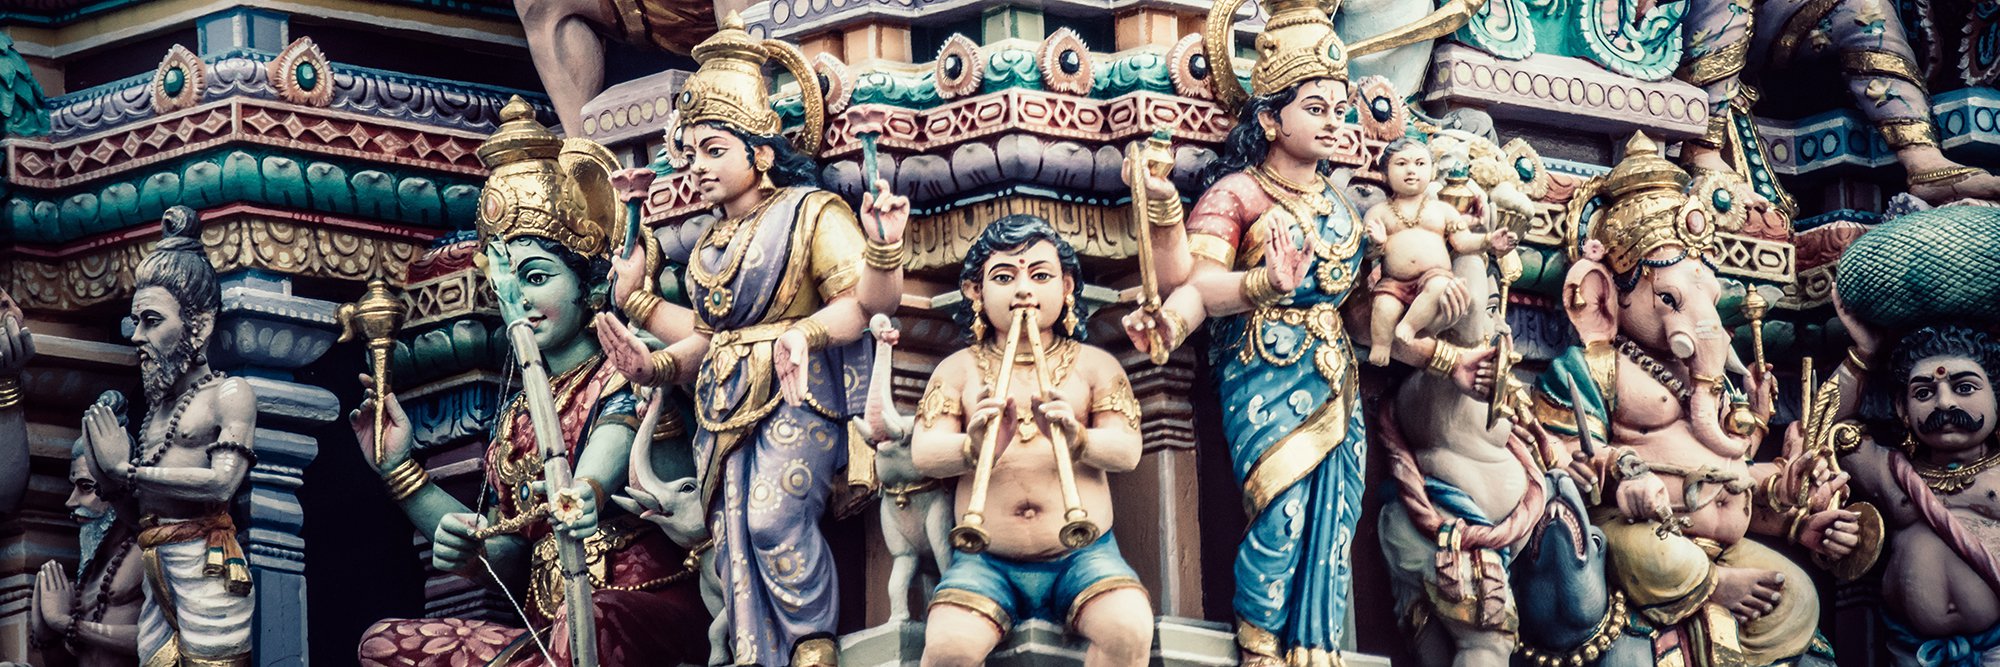 Ornaments of a Hindu temple in Singapore